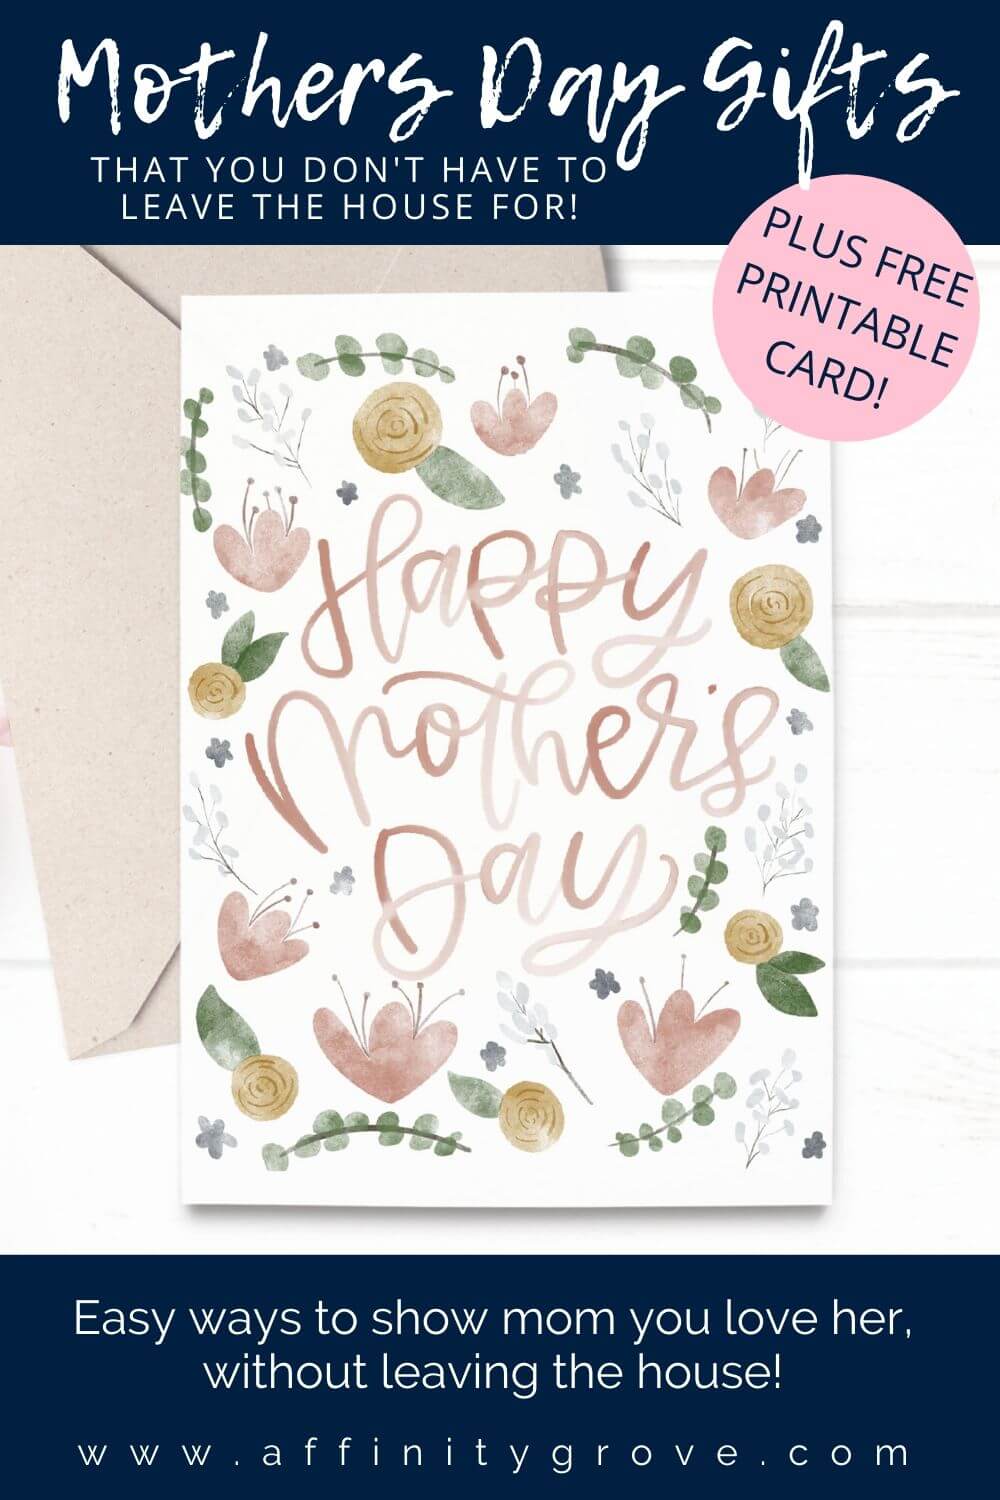 Mother's Day Gift ideas + Free Mother's Day Card